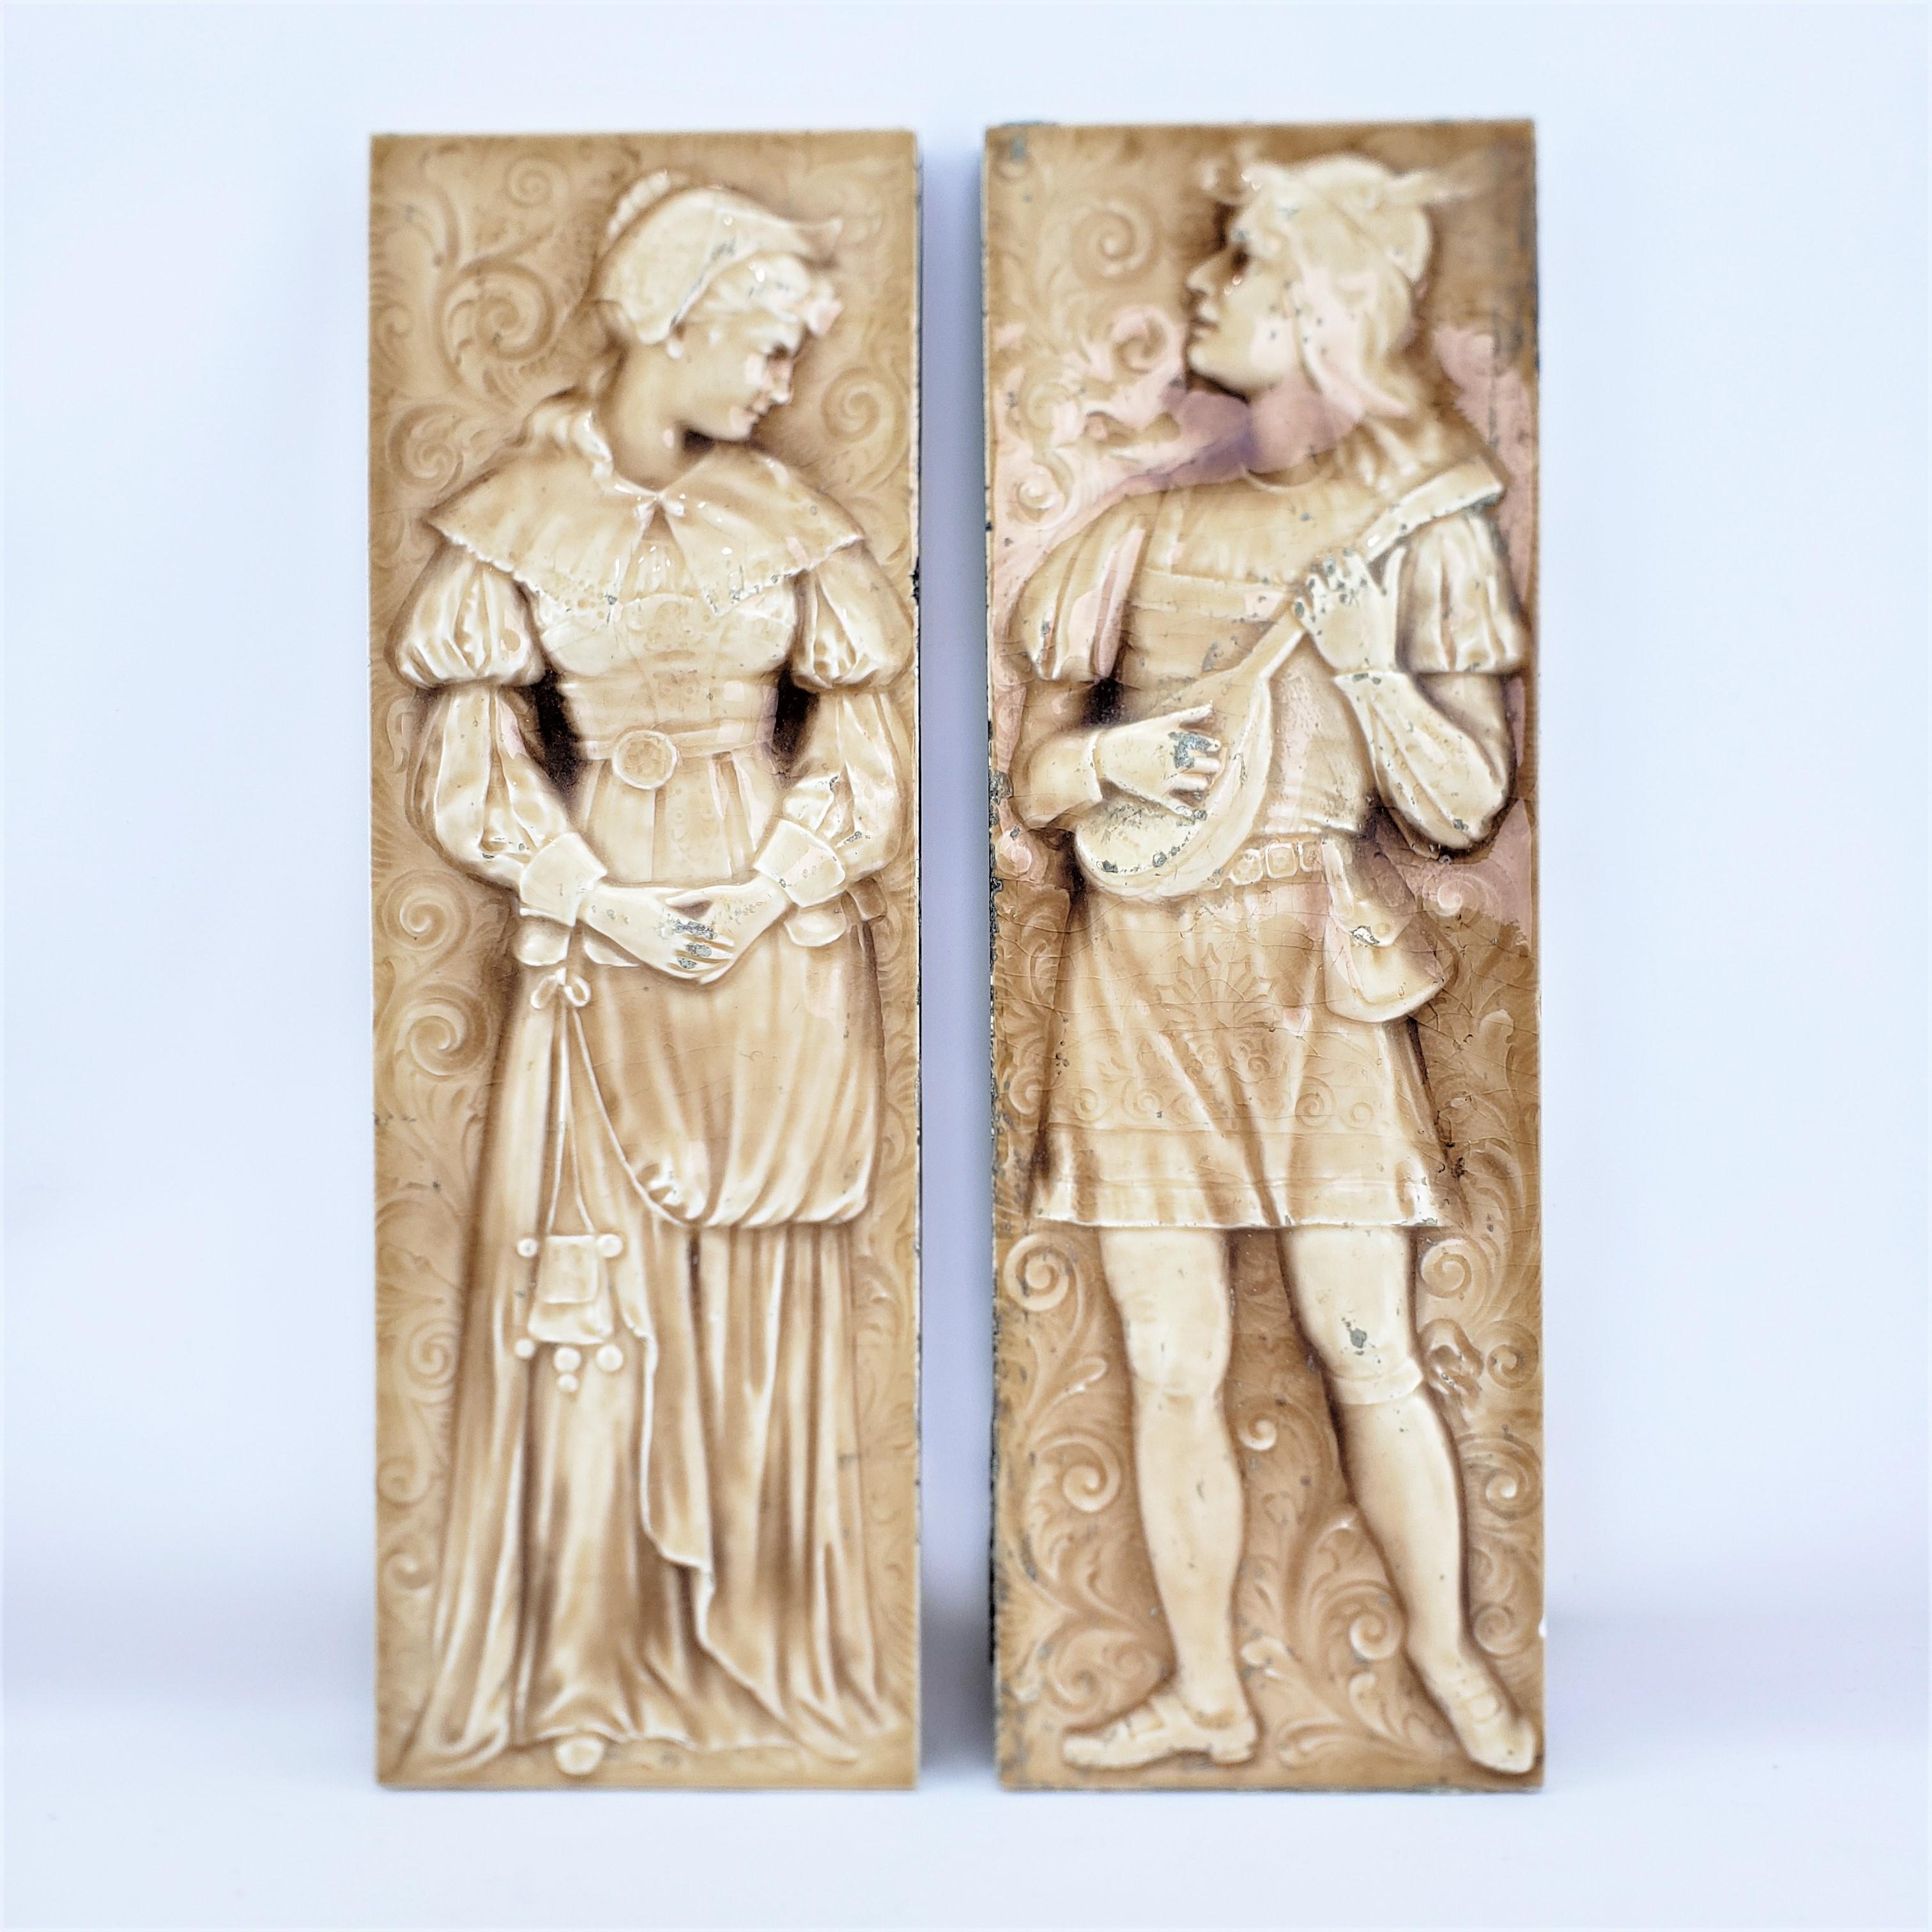 This pair of antique tiles are signed by the American Encaustic tile company of New York and date to approximately 1880 and done in a Renaissance Revival style. The tiles are composed of pottery that have been molded and glazed with a cream ground